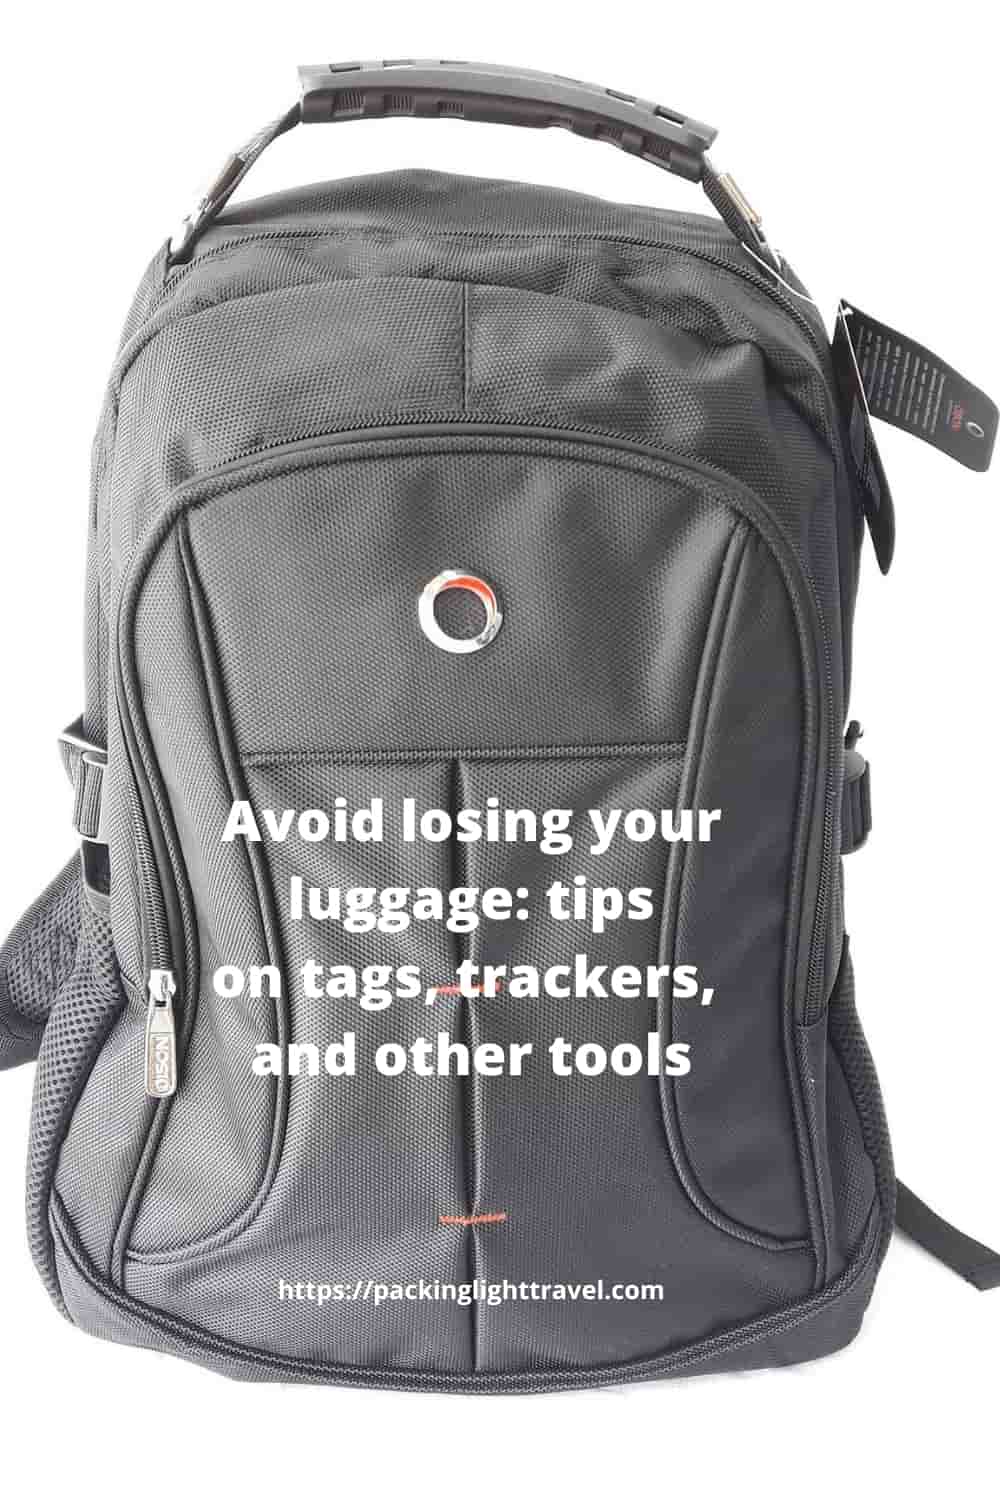 tips-luggage-tags-trackers-and-tools